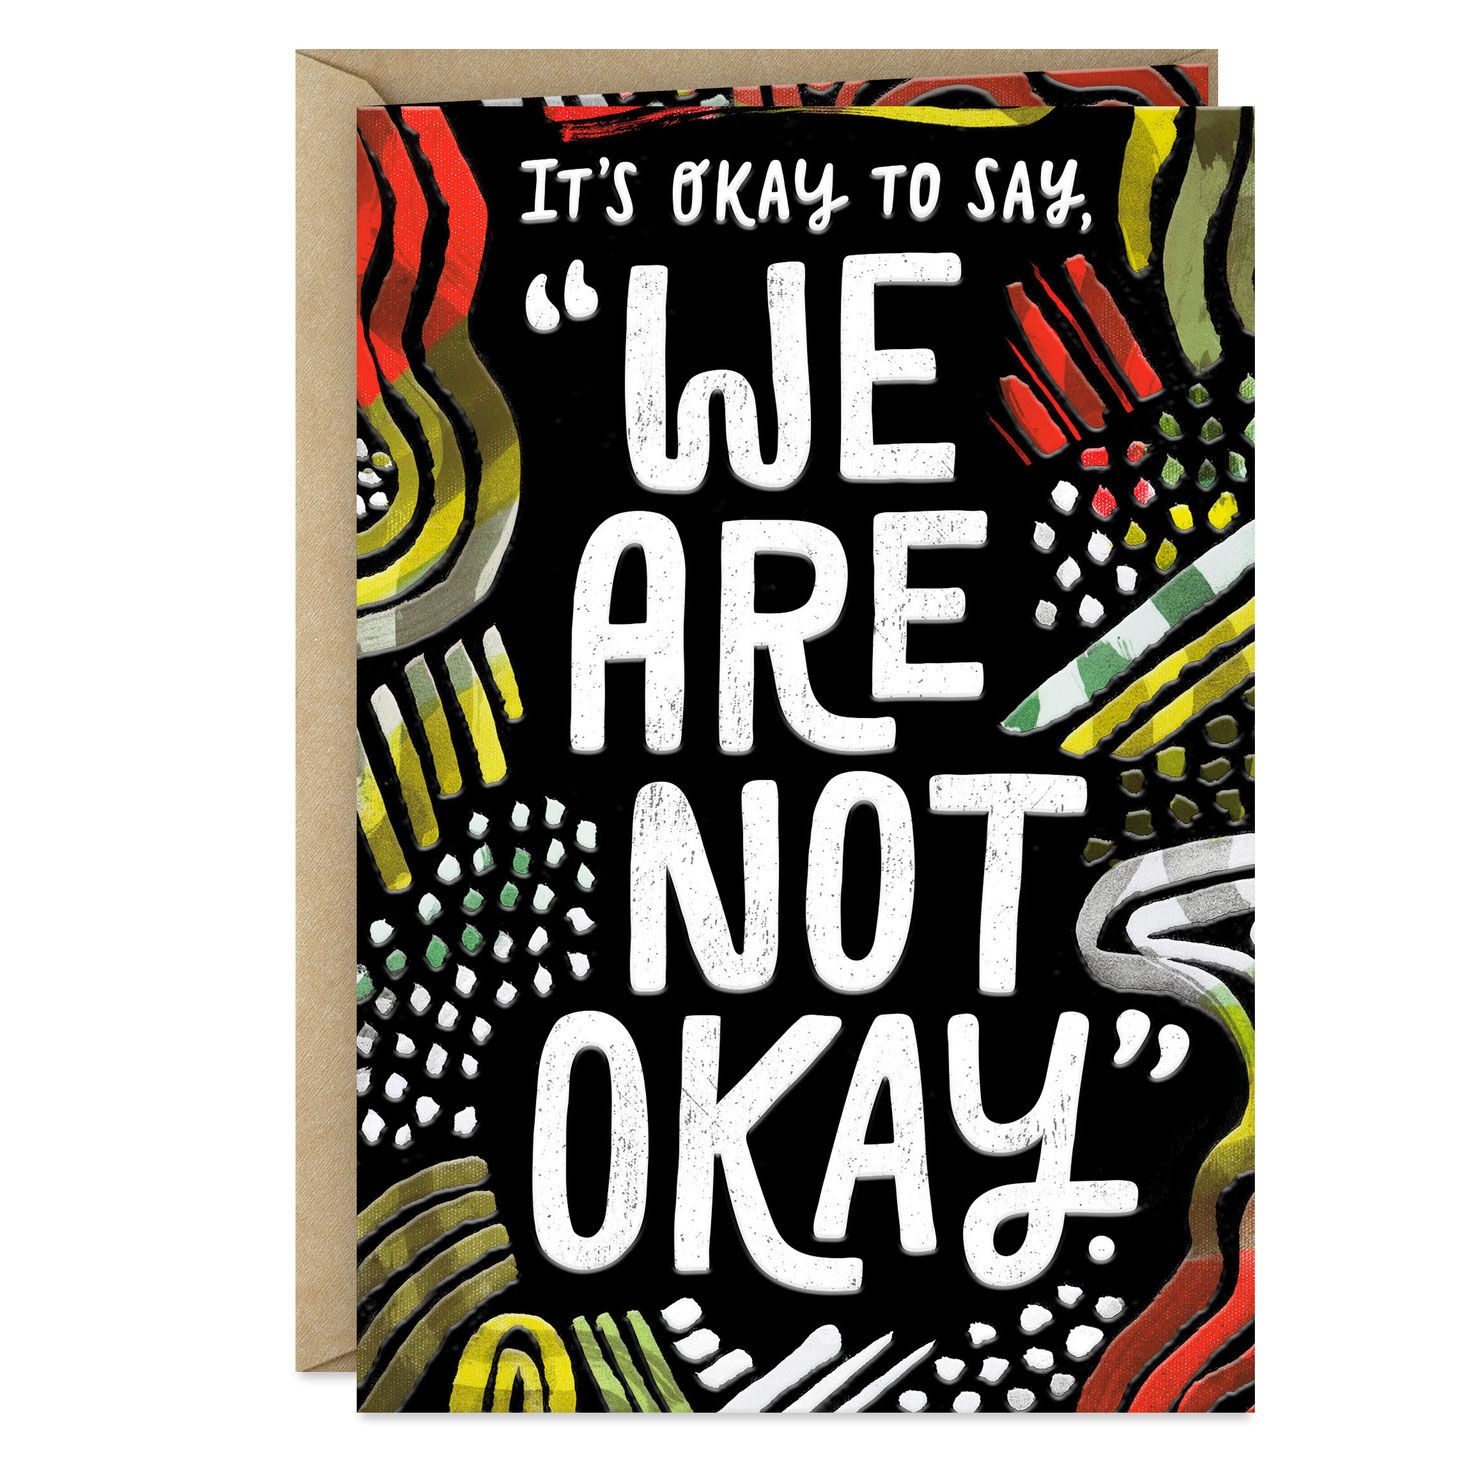 Okay to Not Be Okay Encouragement Card for only USD 3.99 | Hallmark